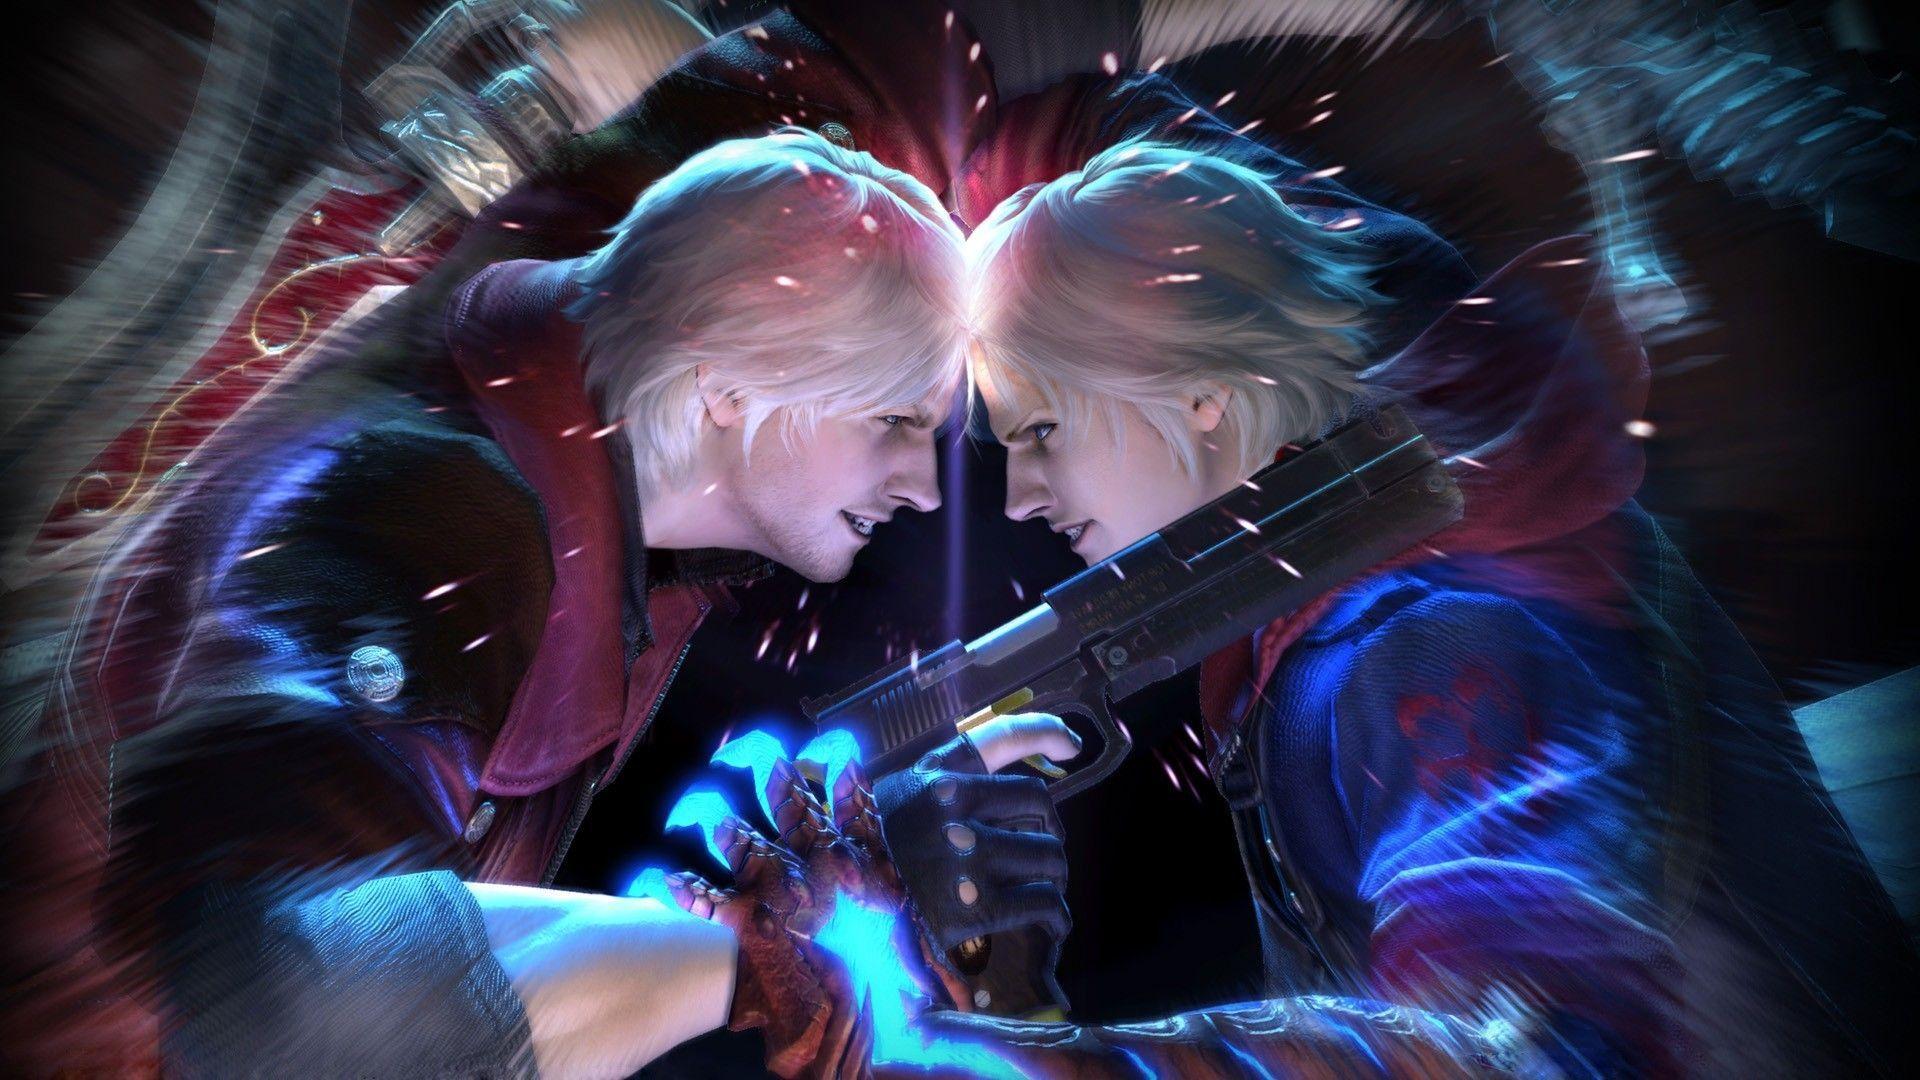 Devil May Cry 4 Wallpapers Nero And Dante Wallpaper Cave